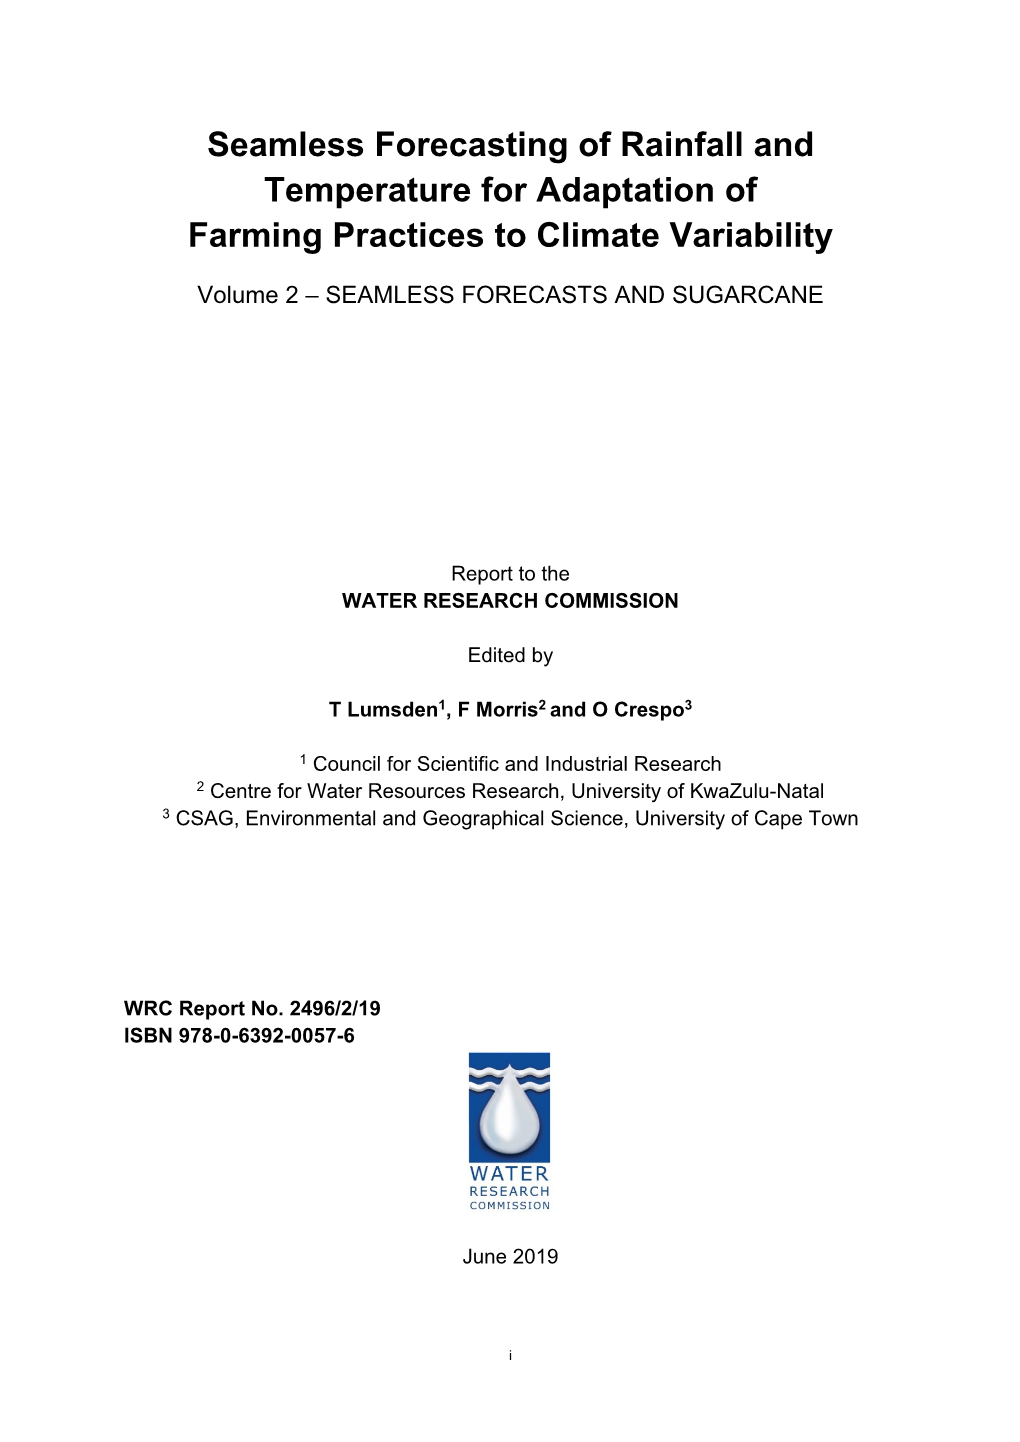 Seamless Forecasting of Rainfall and Temperature for Adaptation of Farming Practices to Climate Variability